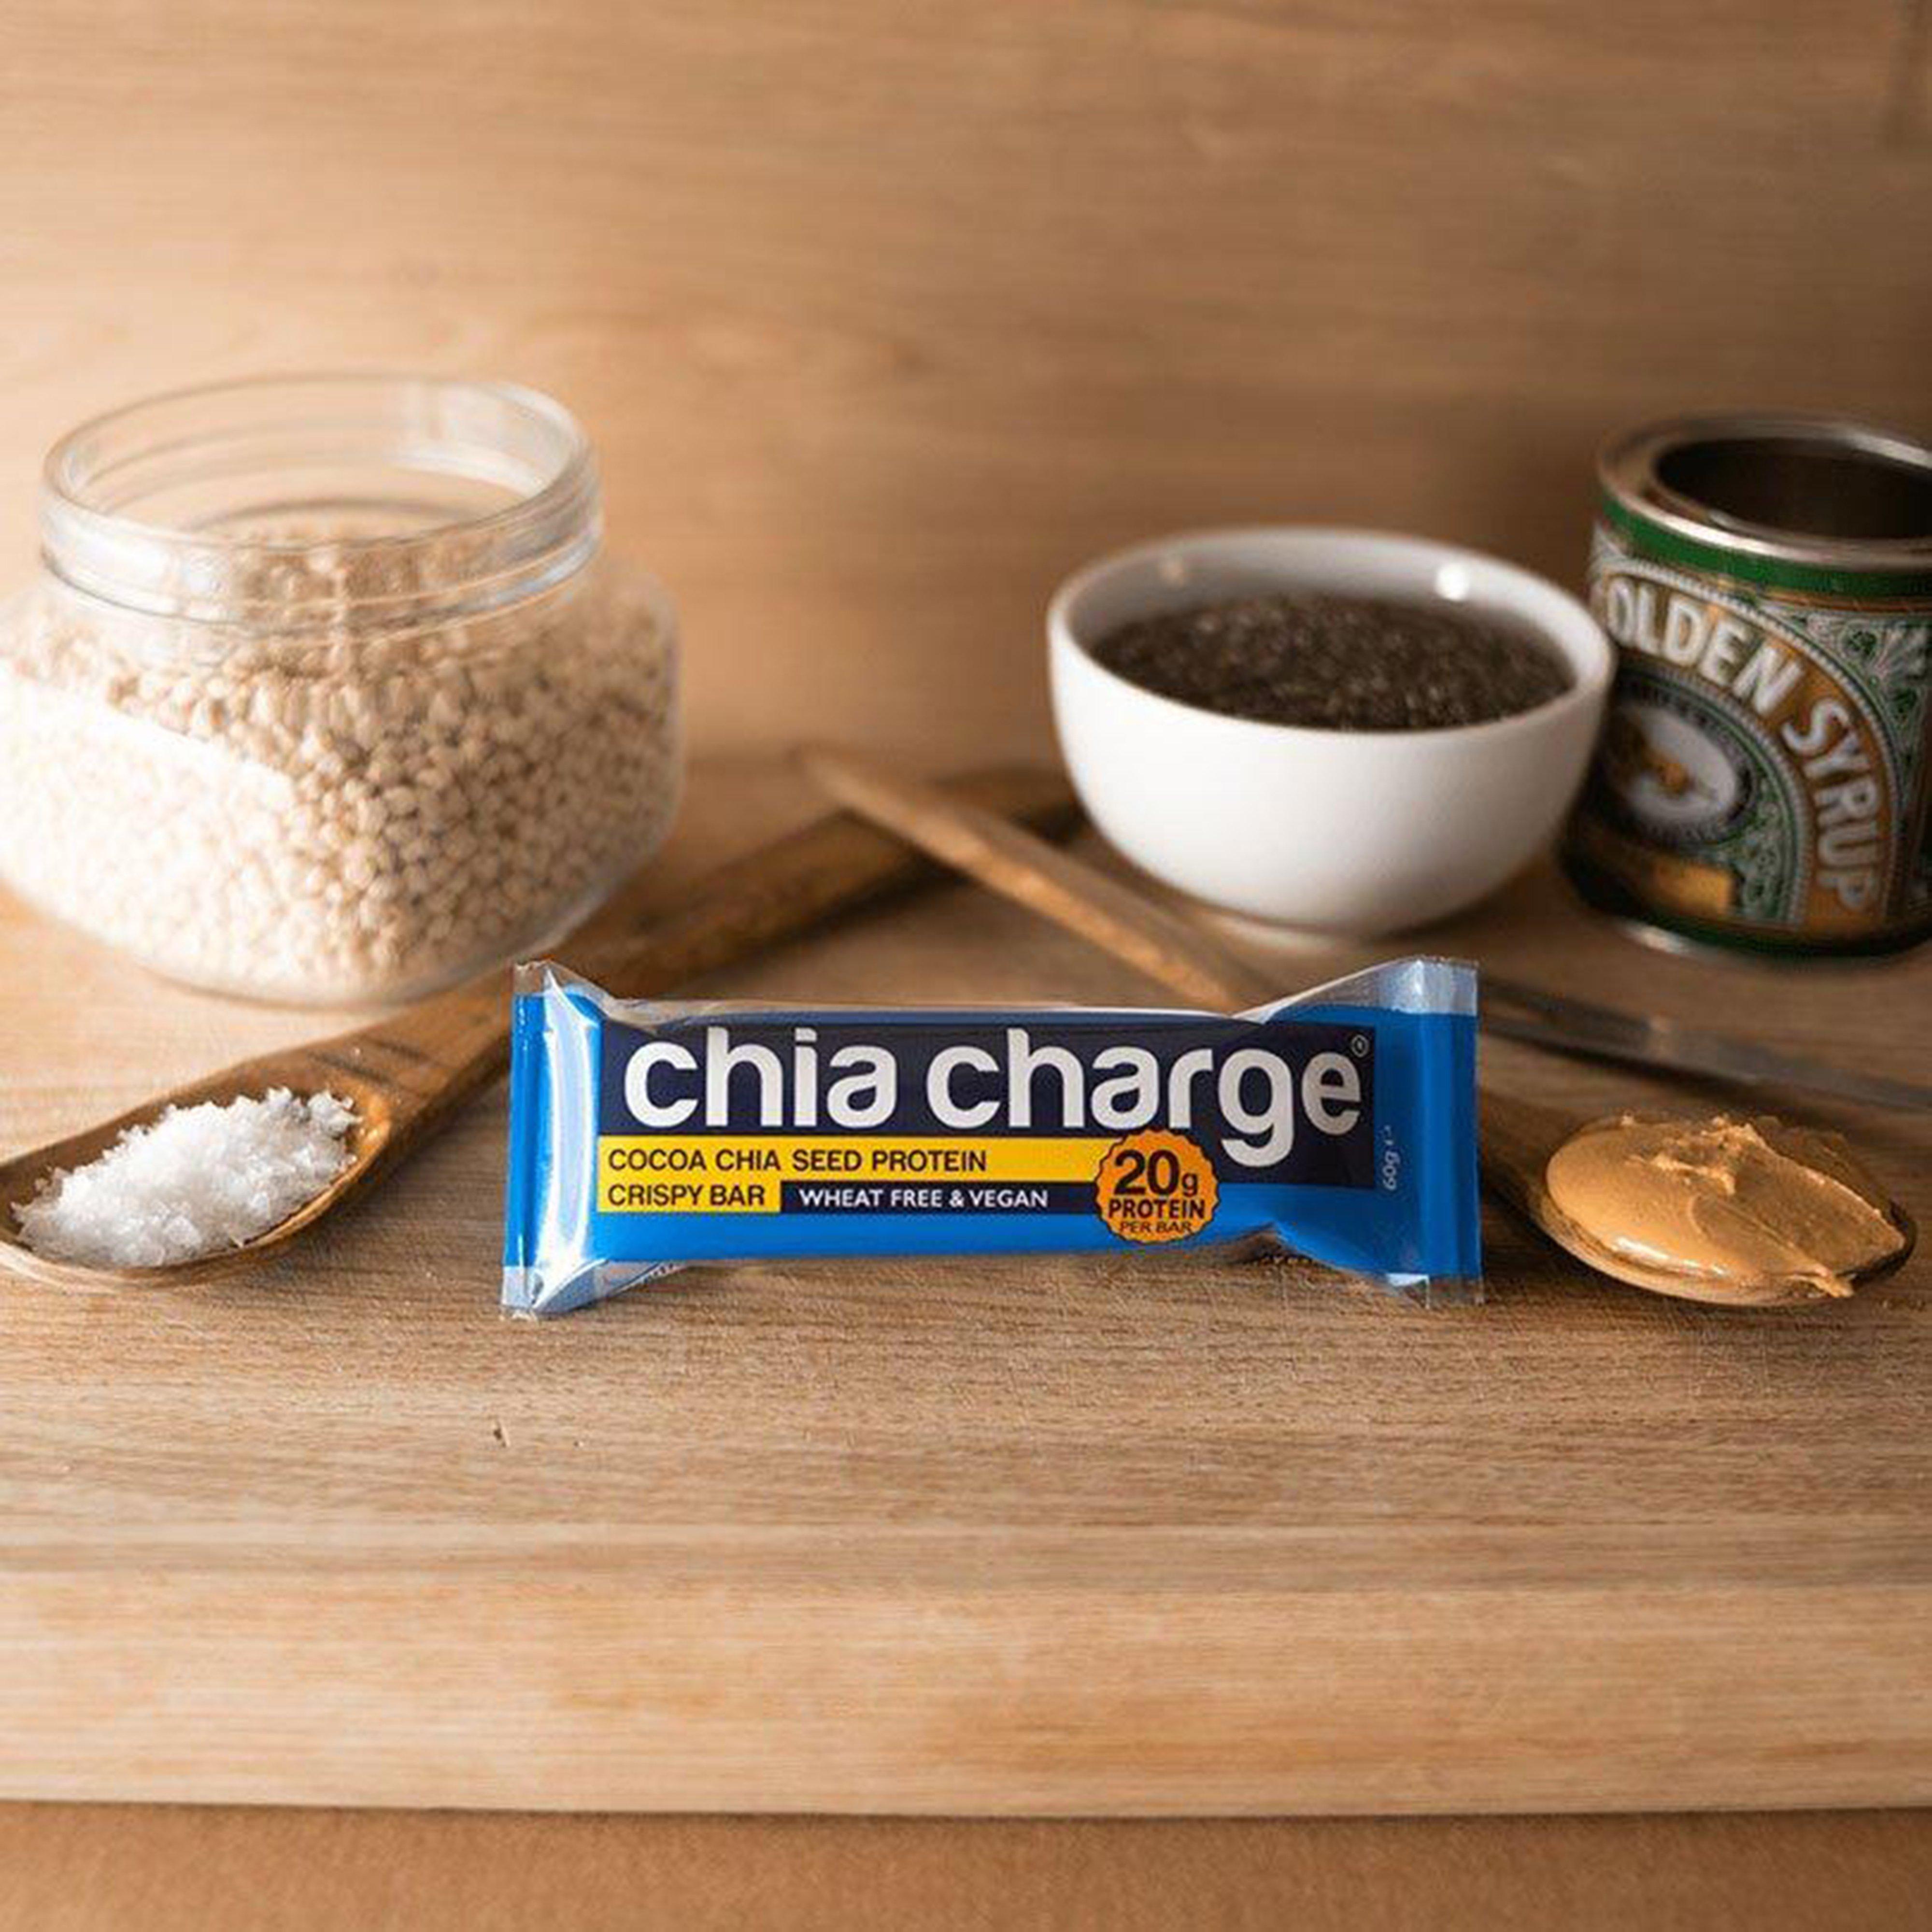 Chia Charge Cocoa Chia Seed Protein Crispy Bar 60g Review